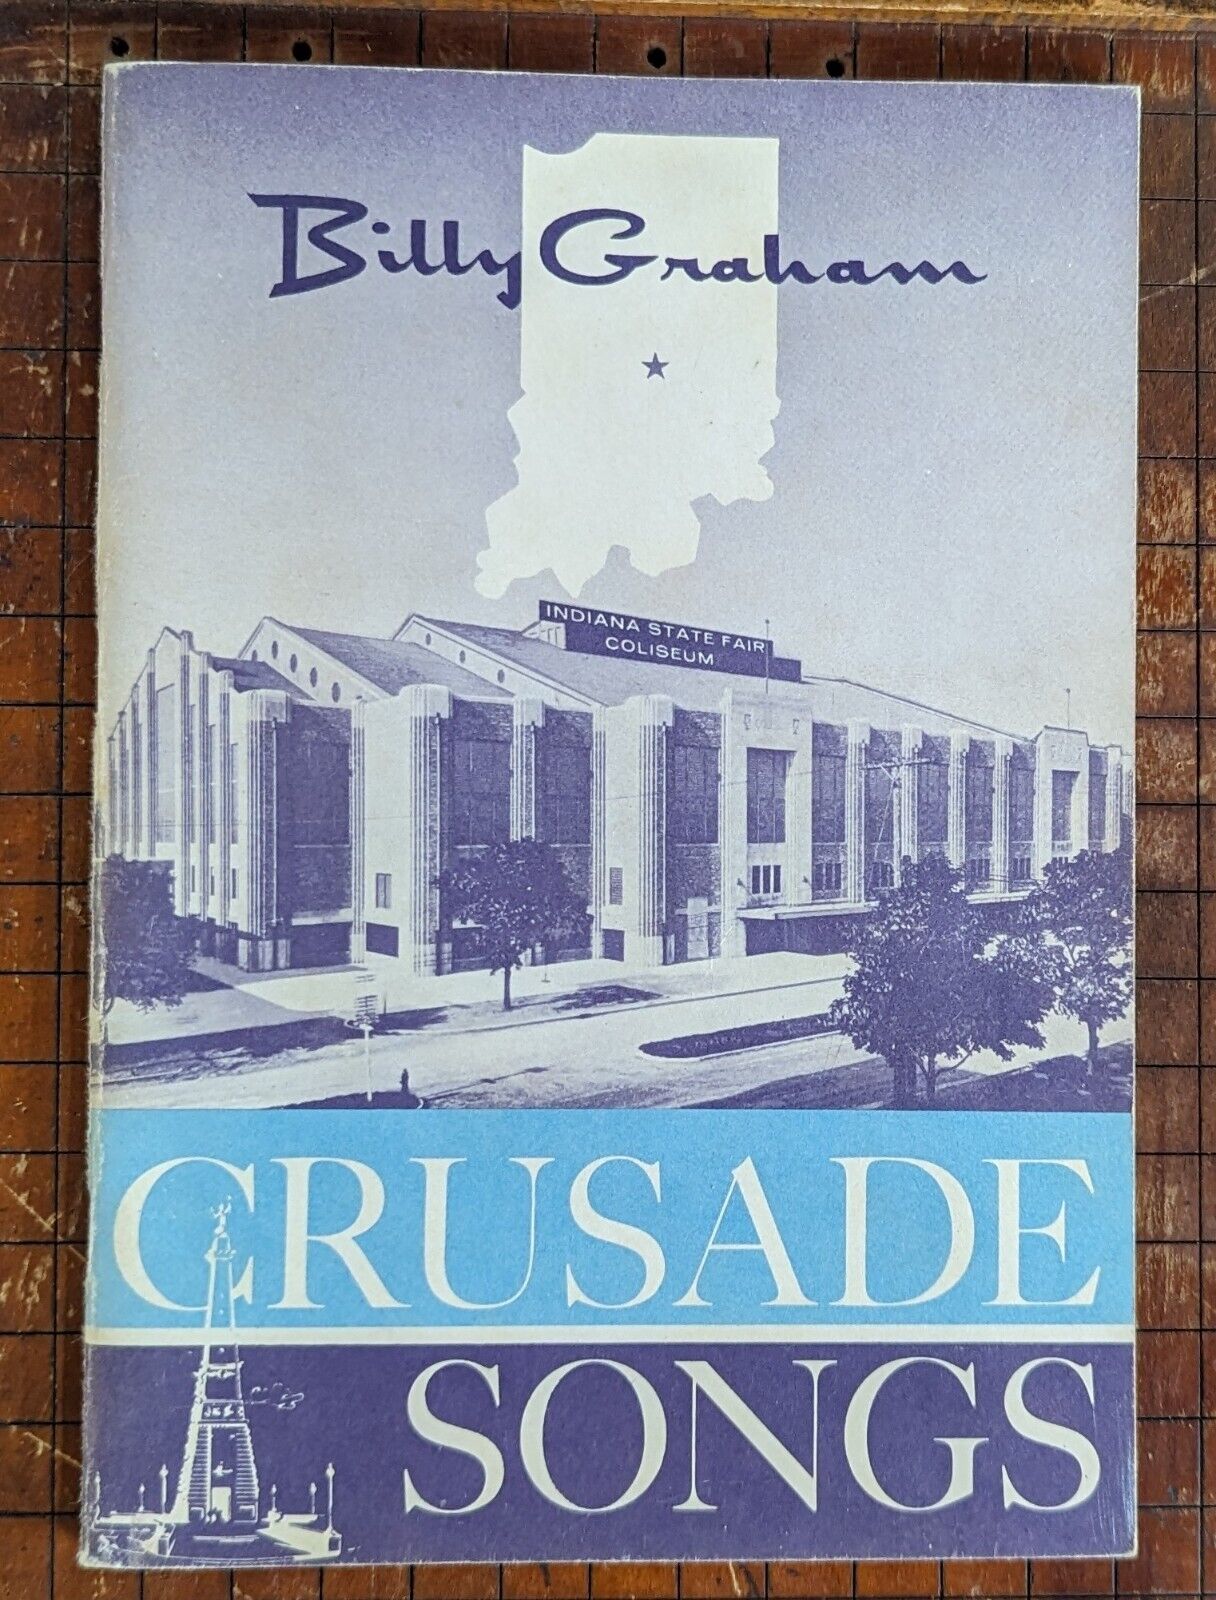 1957 Billy Graham Crusade Songs Booklet from Indiana State Fair Coliseum